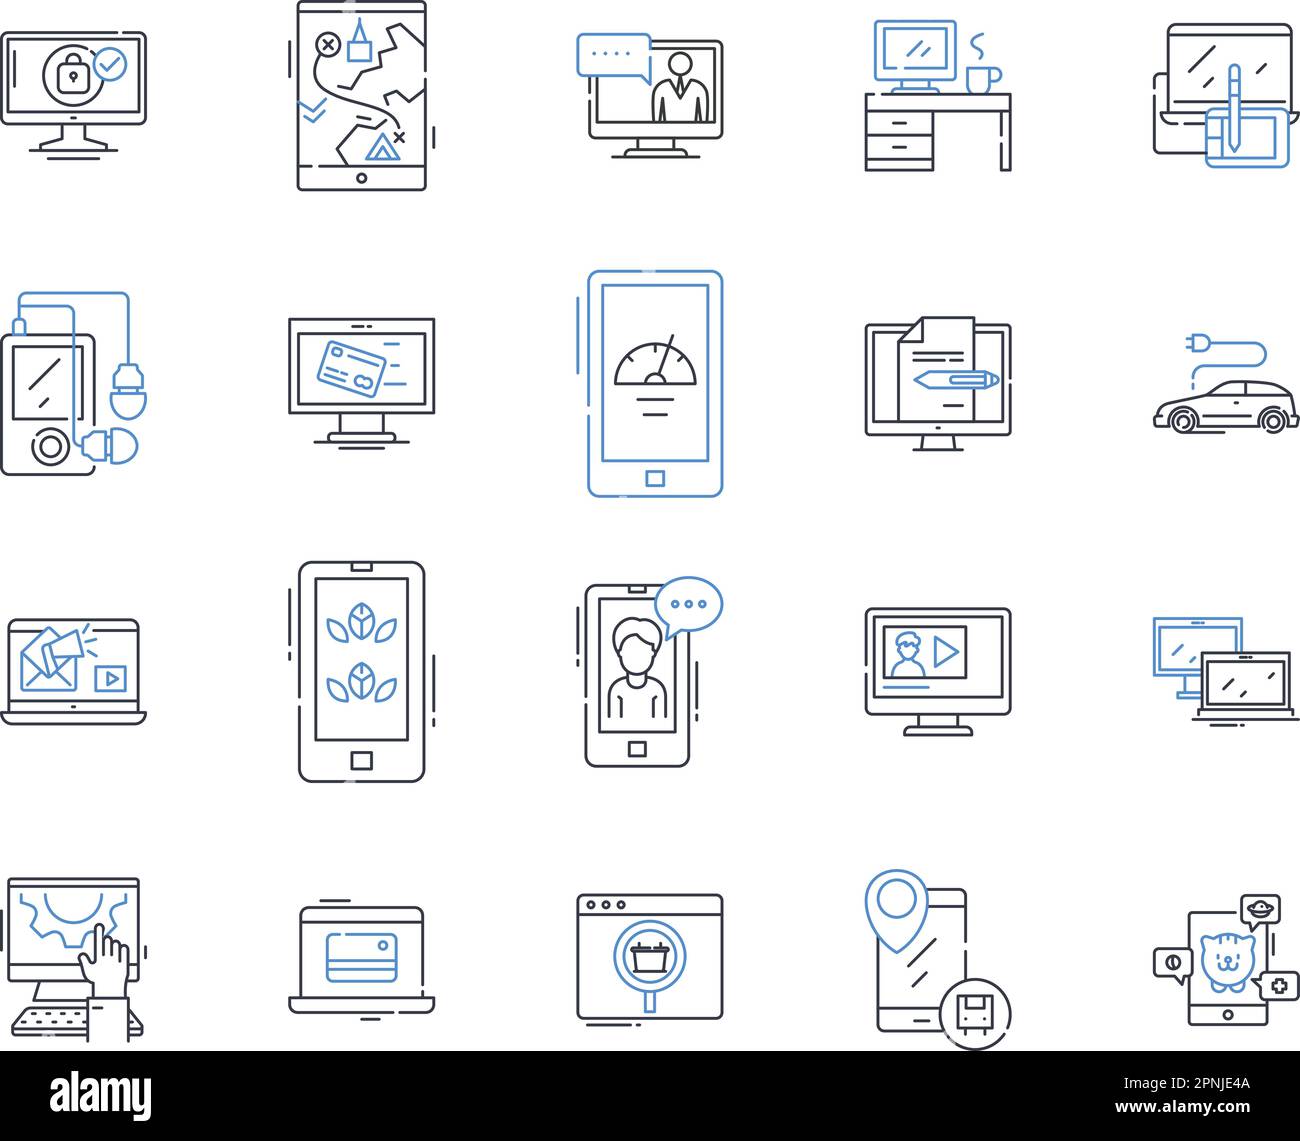 Bluetooth line icons collection. Wireless, Connectivity, Headphs, Speakers, Mobile, Computer, Earbuds vector and linear illustration. Audio,Microph Stock Vector